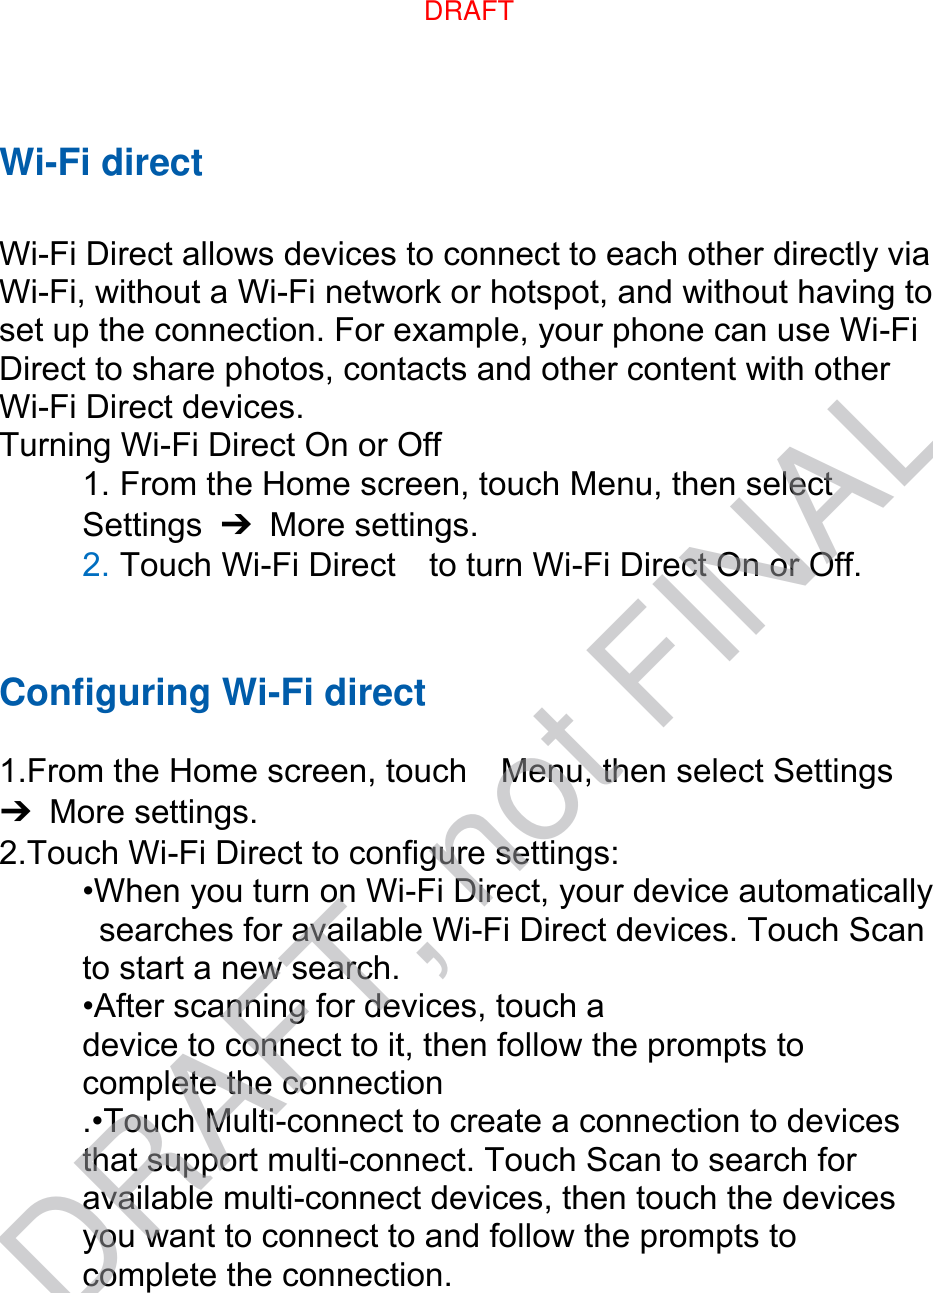 Wi-Fi direct  Wi-Fi Direct allows devices to connect to each other directly via Wi-Fi, without a Wi-Fi network or hotspot, and without having to set up the connection. For example, your phone can use Wi-Fi Direct to share photos, contacts and other content with other Wi-Fi Direct devices.   Turning Wi-Fi Direct On or Off 1. From the Home screen, touch Menu, then select   Settings  ➔  More settings. 2. Touch Wi-Fi Direct    to turn Wi-Fi Direct On or Off.   Configuring Wi-Fi direct    1.From the Home screen, touch    Menu, then select Settings ➔  More settings. 2.Touch Wi-Fi Direct to configure settings:   •When you turn on Wi-Fi Direct, your device automatically   searches for available Wi-Fi Direct devices. Touch Scan   to start a new search. •After scanning for devices, touch a   device to connect to it, then follow the prompts to   complete the connection .•Touch Multi-connect to create a connection to devices that support multi-connect. Touch Scan to search for available multi-connect devices, then touch the devices you want to connect to and follow the prompts to complete the connection.DRAFTDRAFT, not FINAL